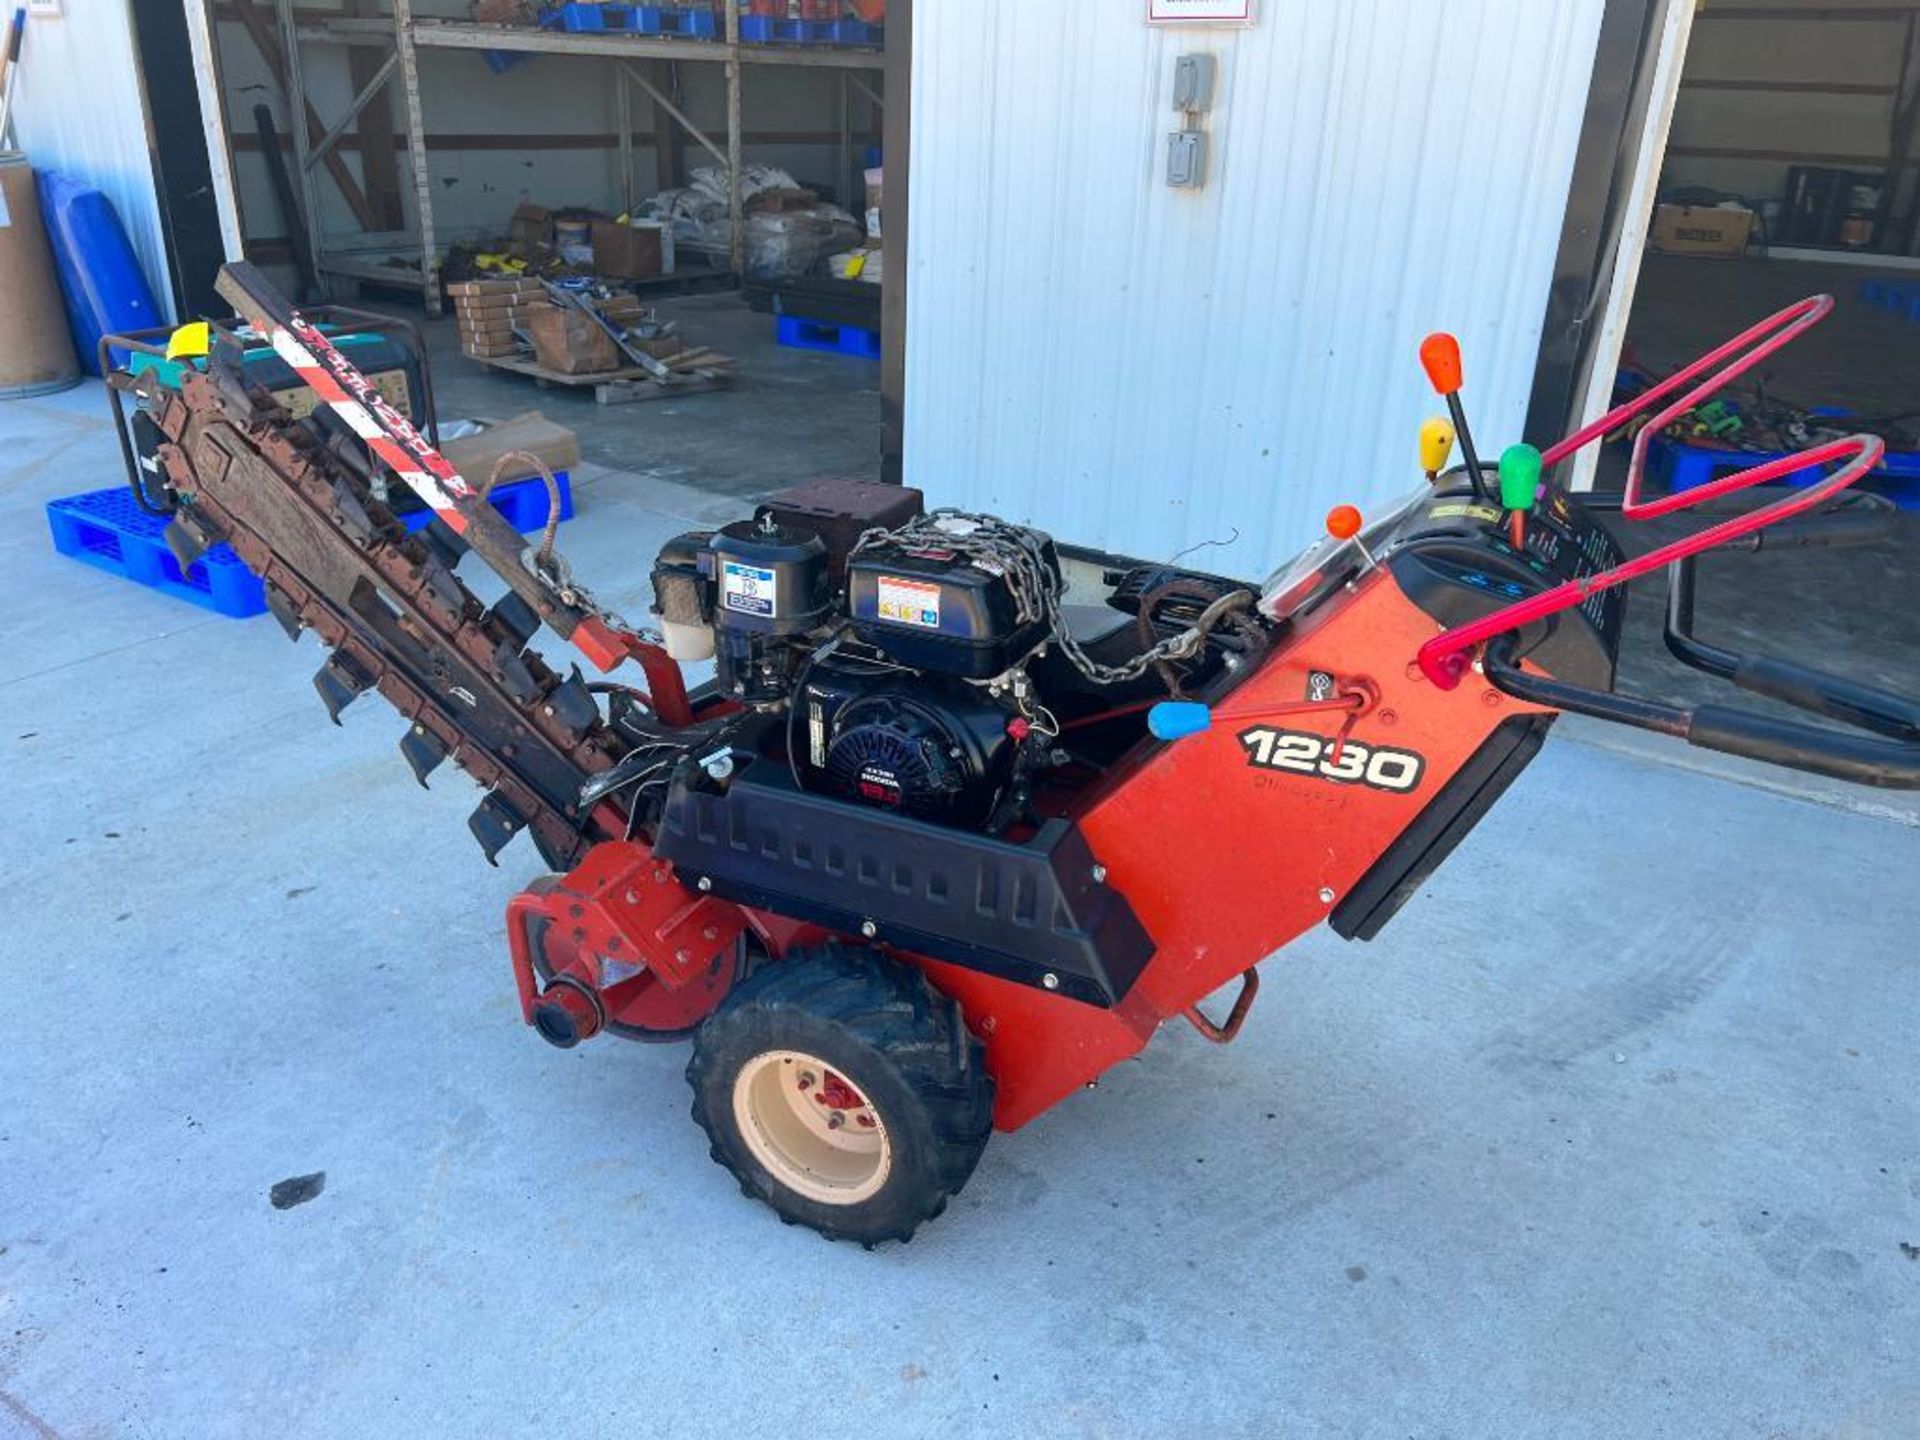 2006 Ditch Witch 1230 Walk Behind Trencher With New Teeth, Honda GX390 Engine, Product #CMW1230HK600 - Image 2 of 10